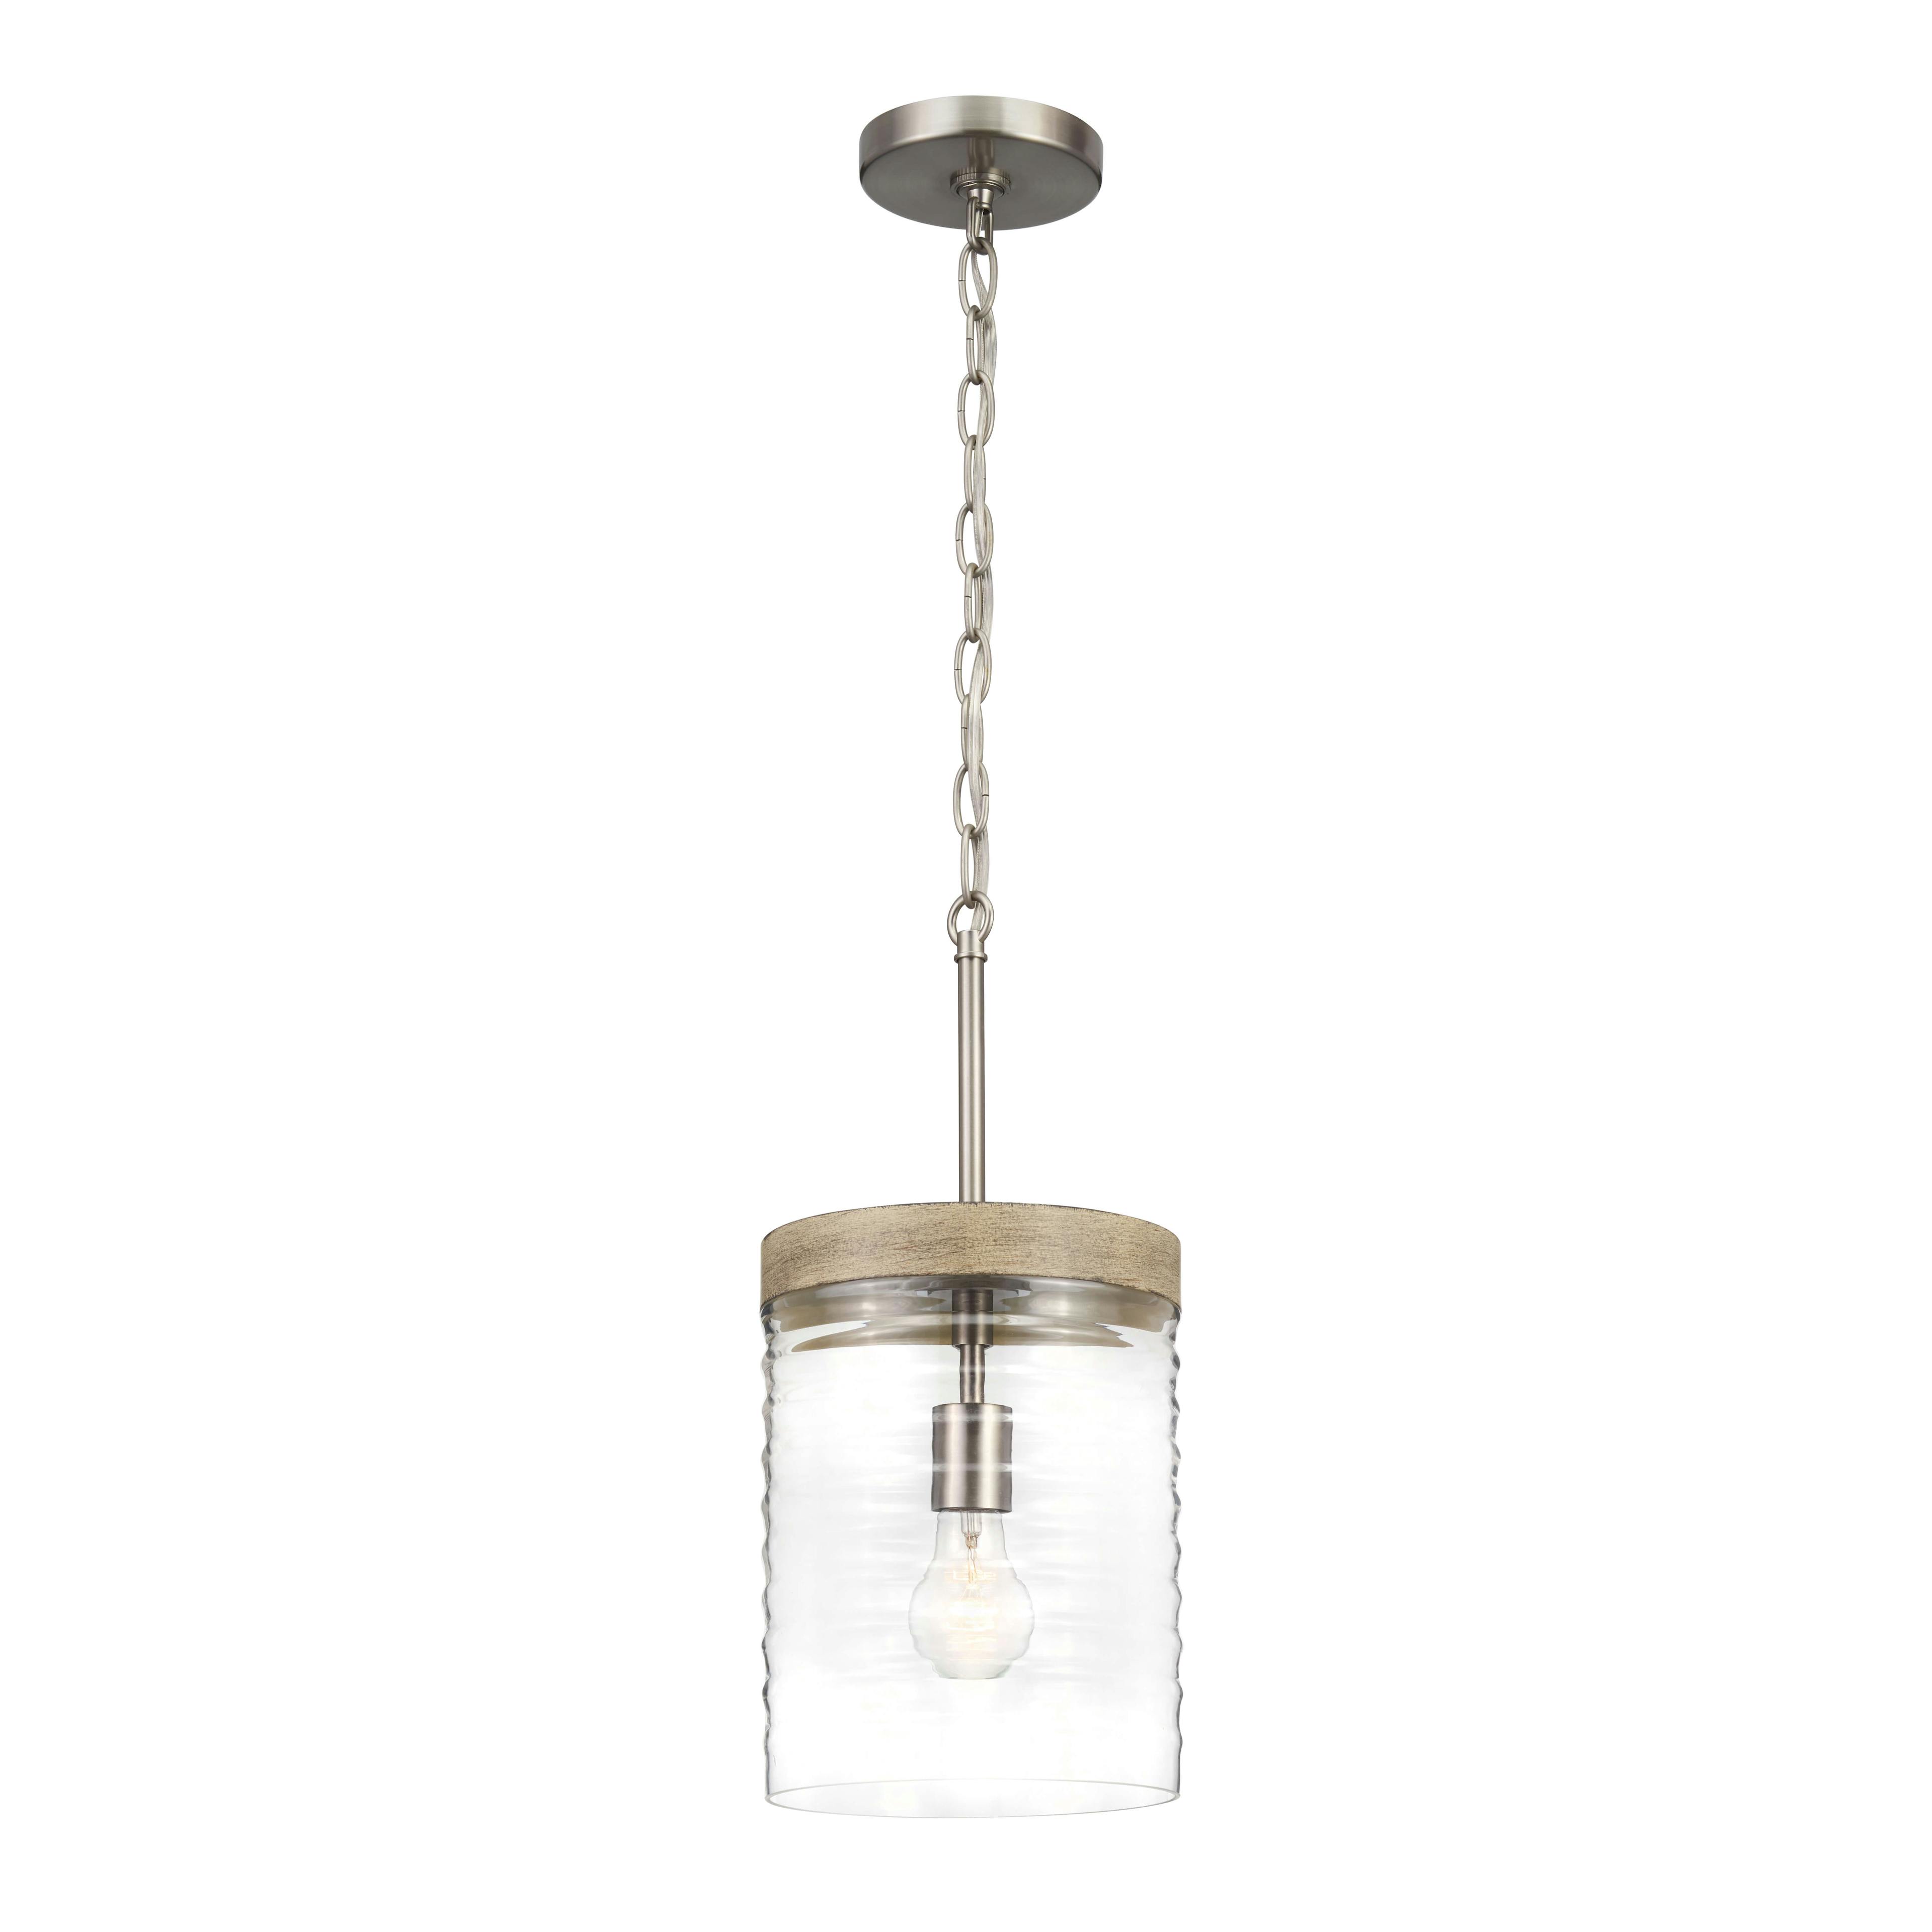 Maritime 1 Light Mini Pendant in Brushed Nickel and Distressed Antique Gray with Ribbed Glass on a white background